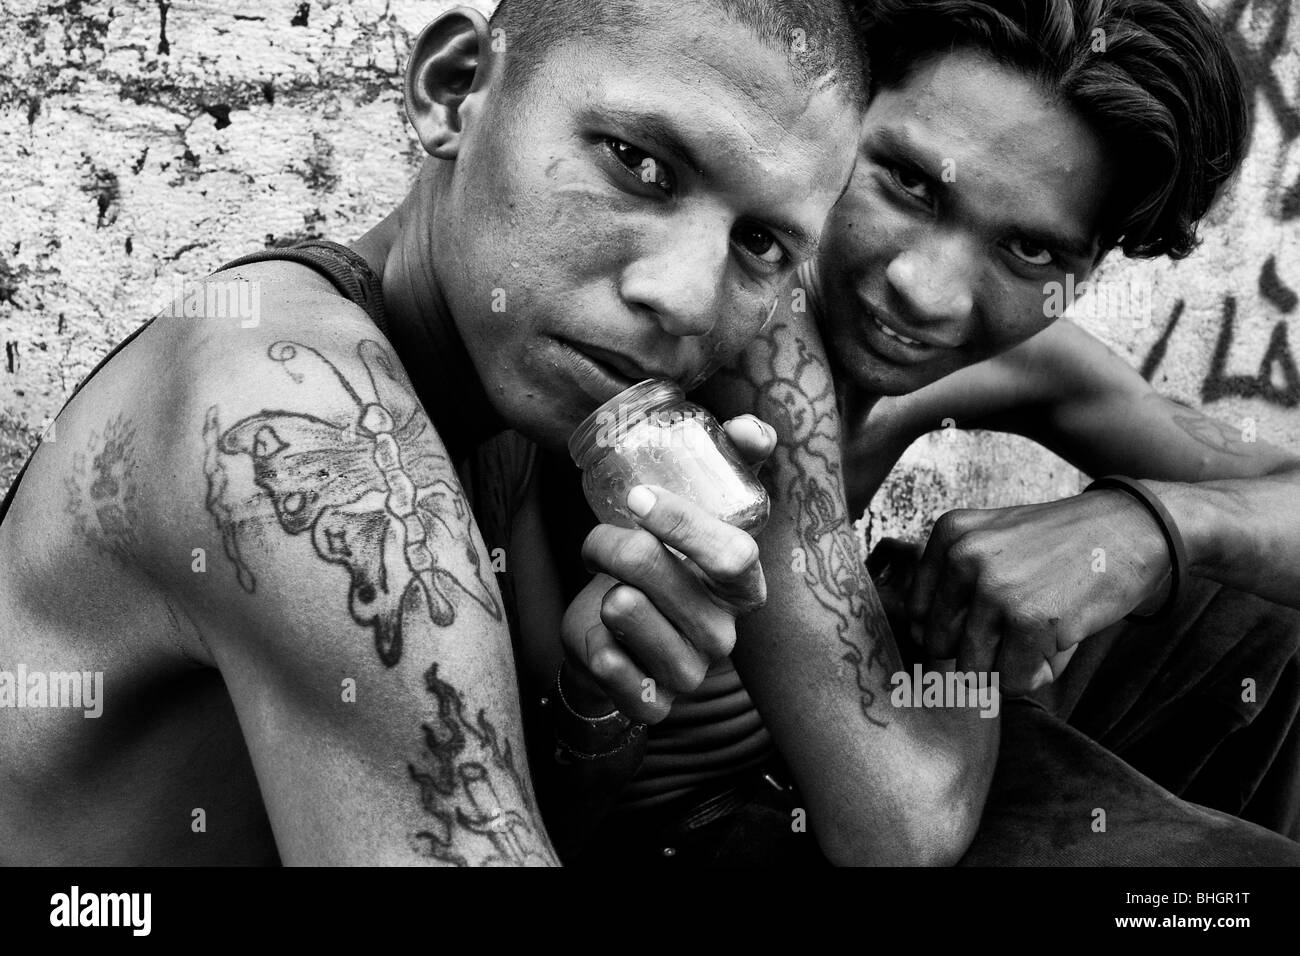 Young Nicaraguan boys living on the street and sniffing the shoe glue, Managua, Nicaragua. Stock Photo